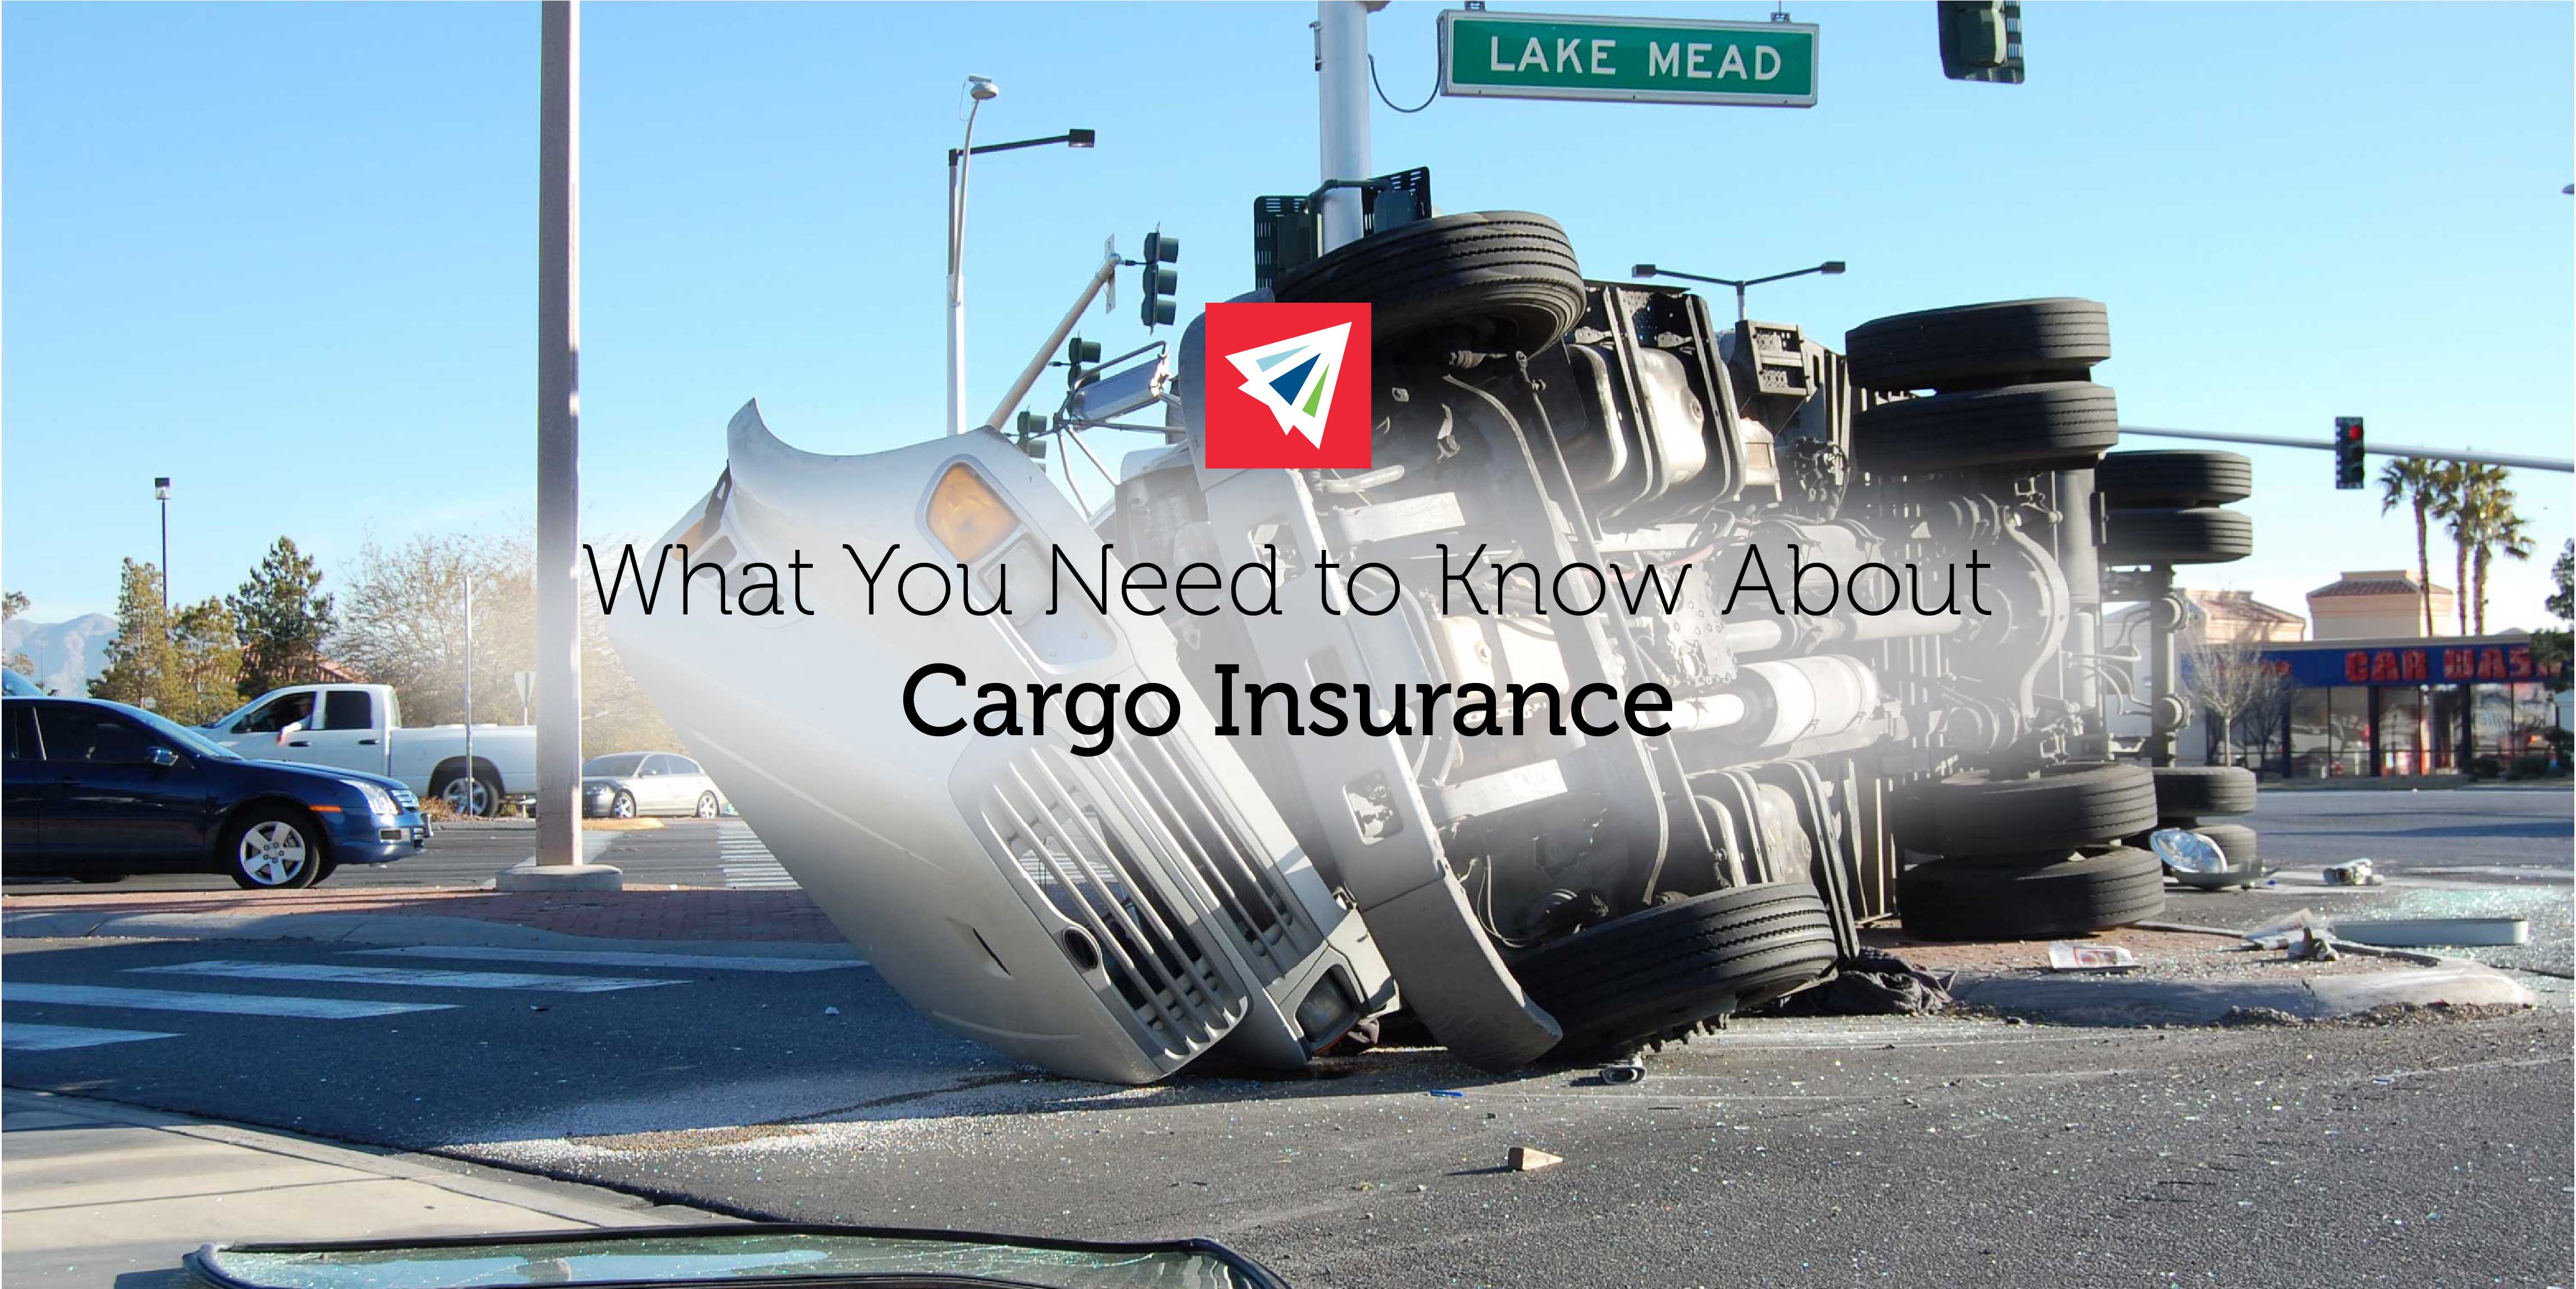 Cargo Insurance - What You Need to Know_1